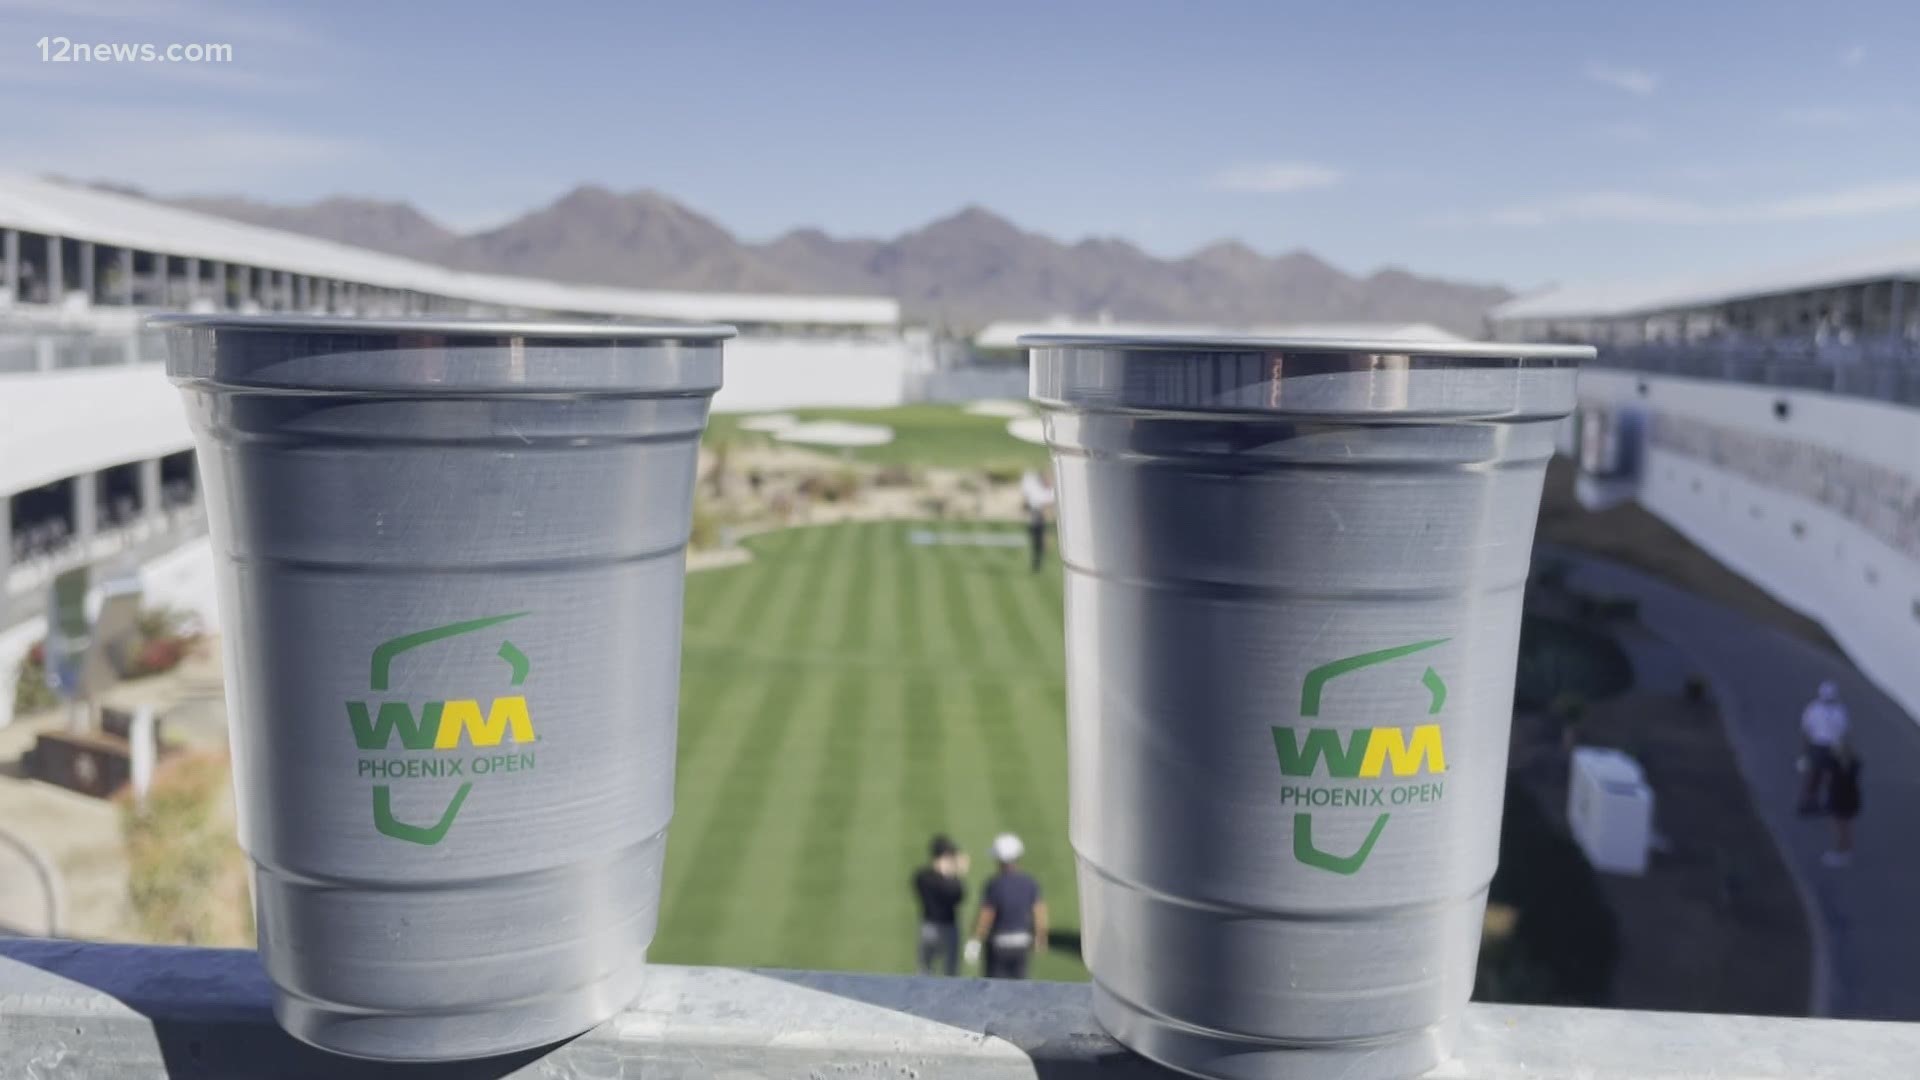 The greatest show on grass is also the greenest show on grass. The WMPO makes every effort to reduce waste and this year's cups are doing just that.